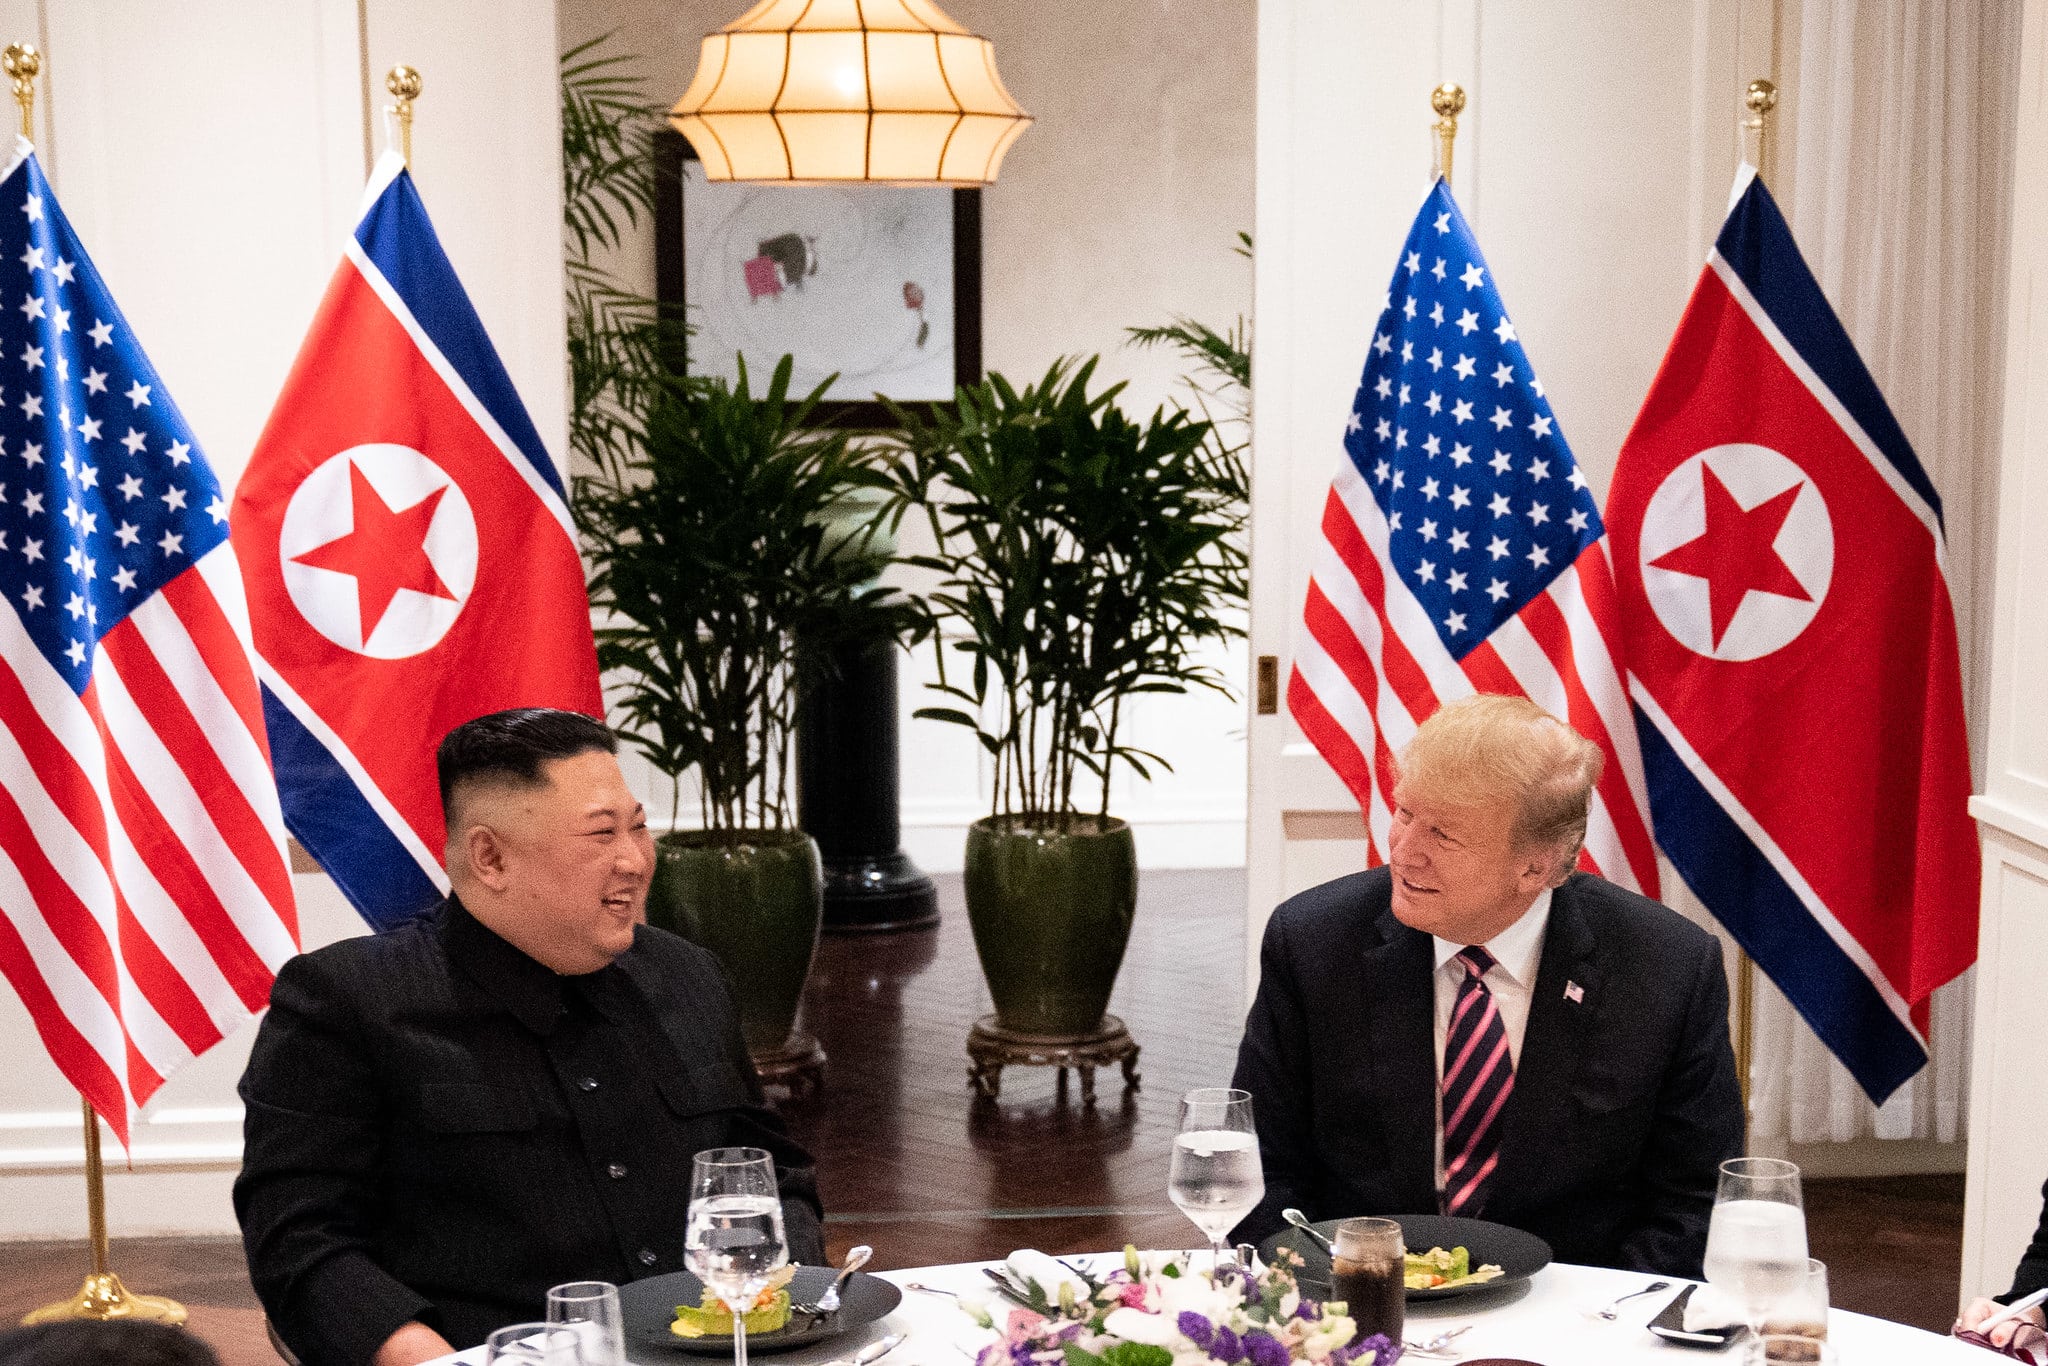 Kim Jong-UN on the eve of the Day of the Sun called for the strengthening of the Juche idea and threatened the United States with a nuclear strike